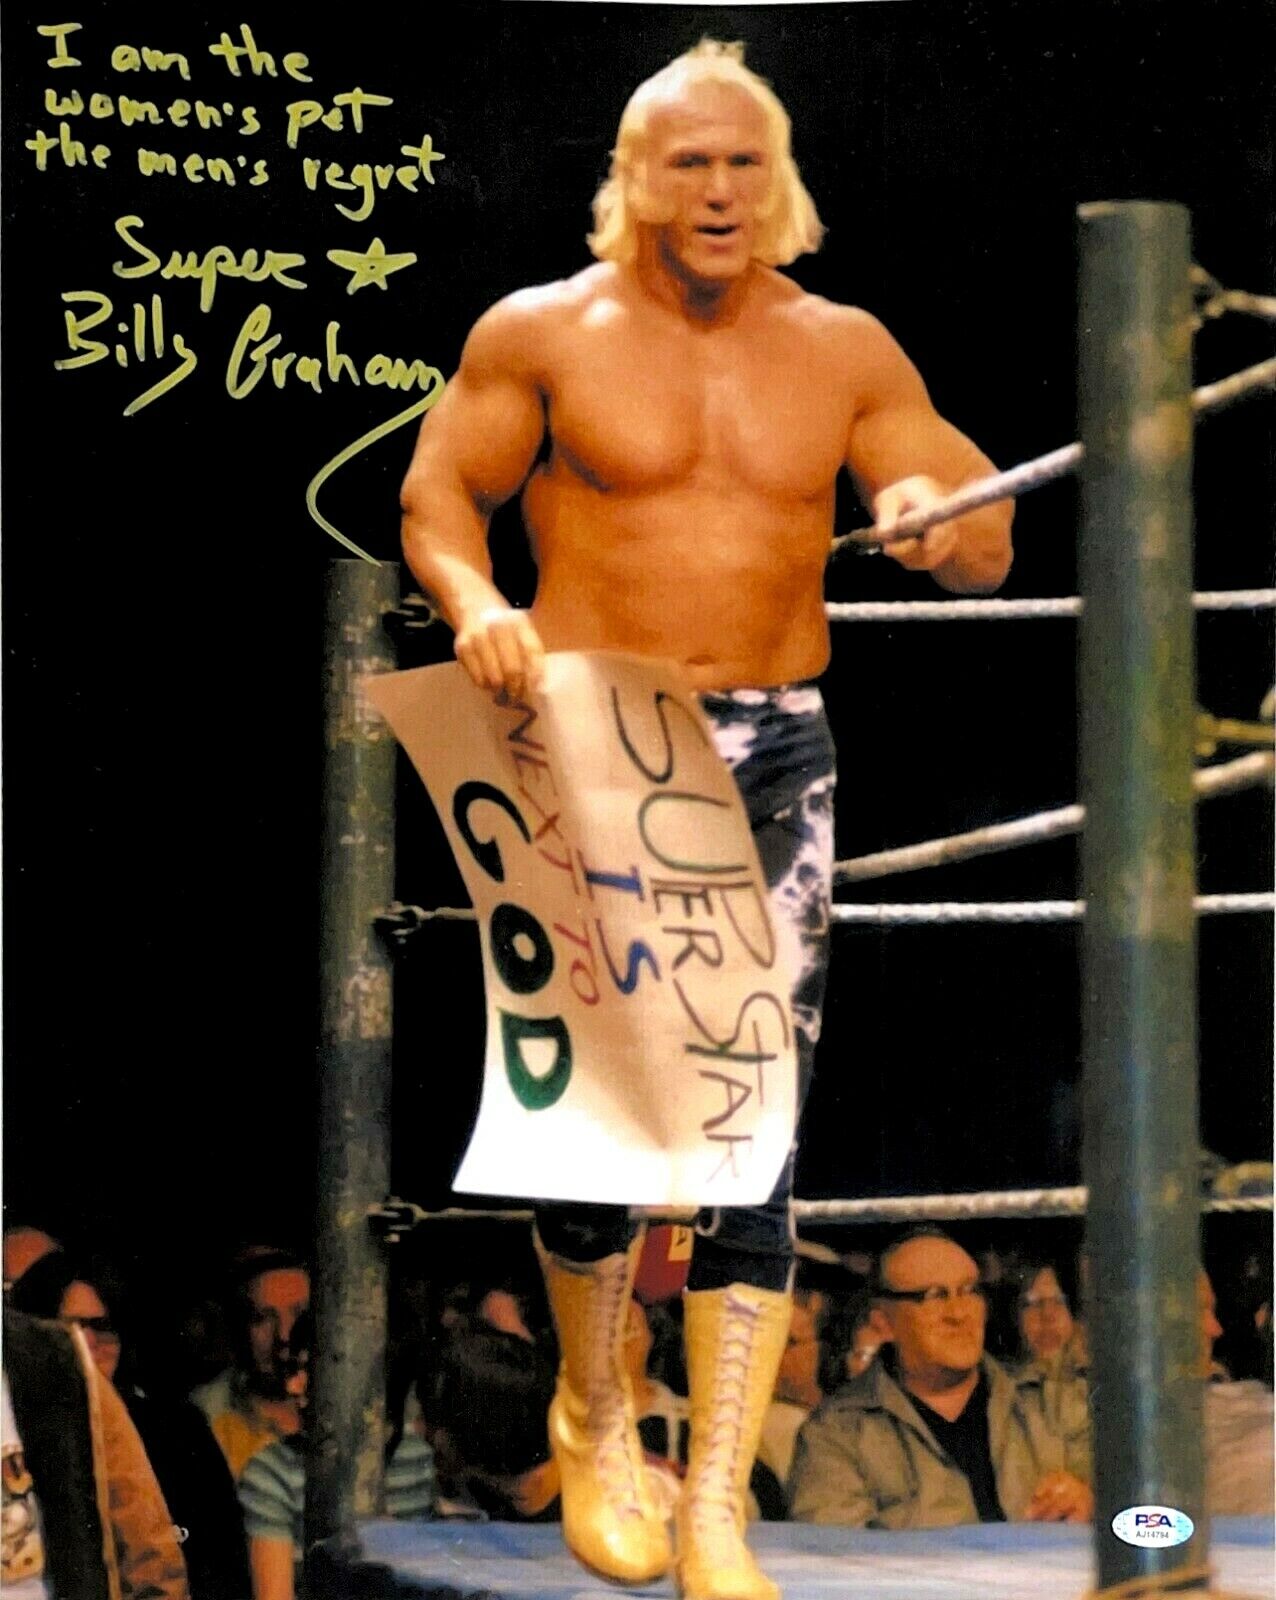 WWE BILLY GRAHAM HAND SIGNED AUTOGRAPHED 16X20 WRESTLING Photo Poster painting WITH PSA COA 3